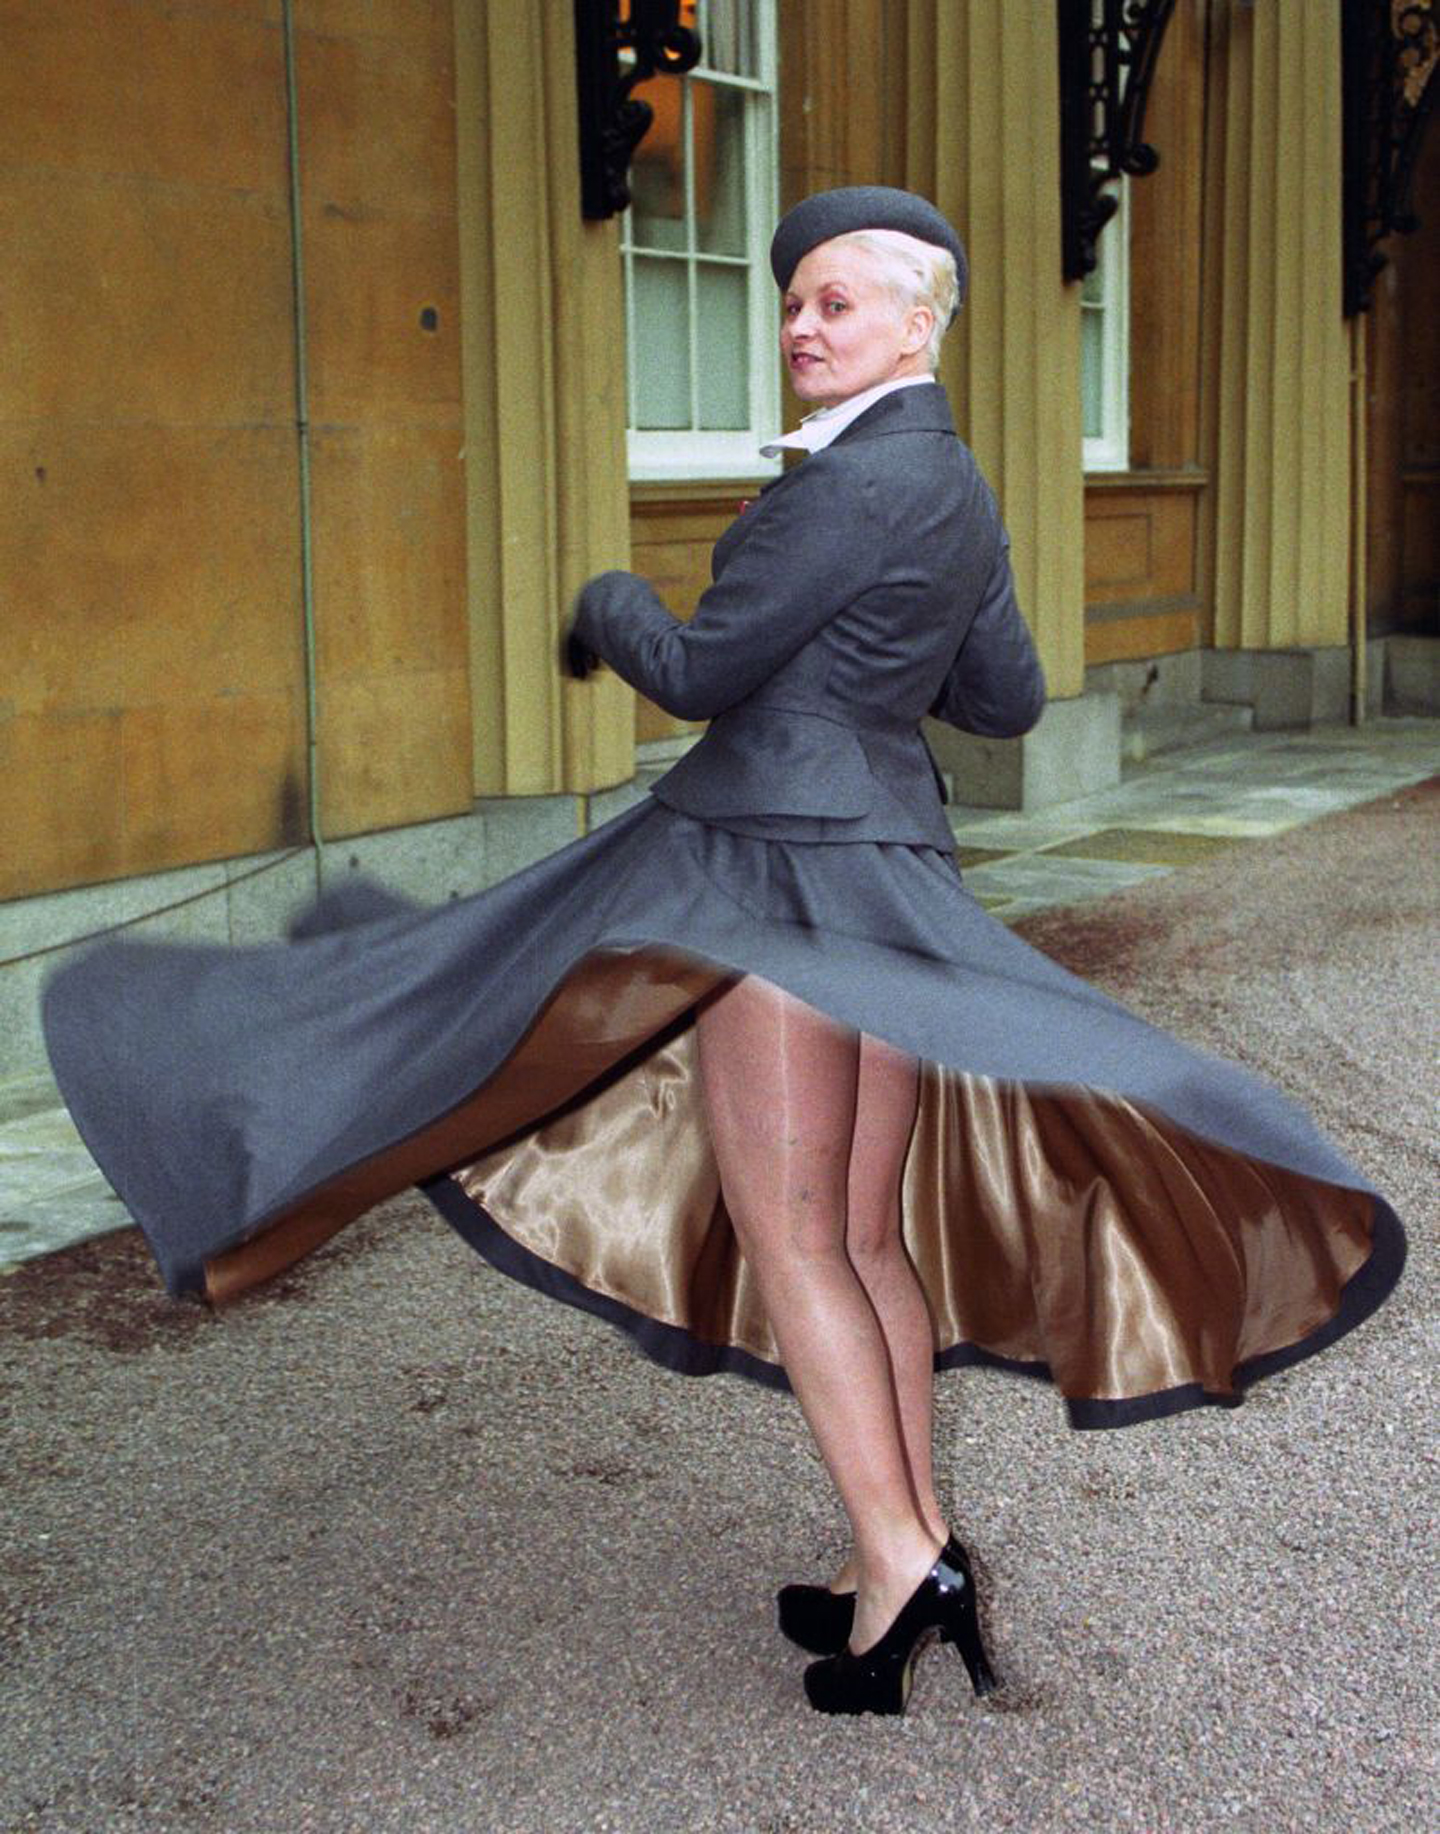 Vivienne Westwood at Buckingham Palace, London, where she received her OBE from Queen Elizabeth II. While giving a twirl for the photographers, she showed that beneath her tailored suit she was not wearing knickers